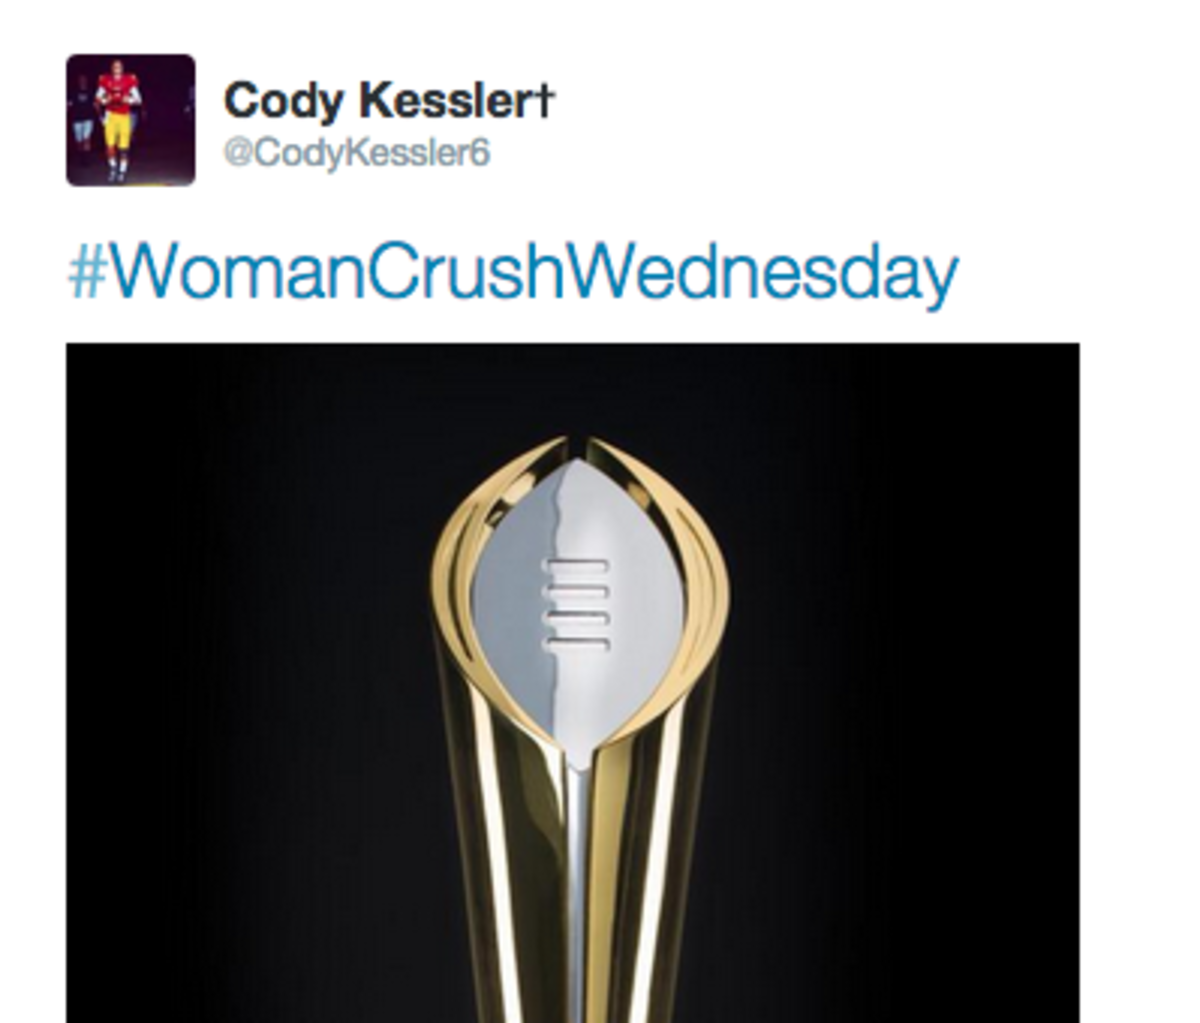 USC's Cody Kessler posts a picture of the College Football Playoff trophy for Woman Crush Wednesday.